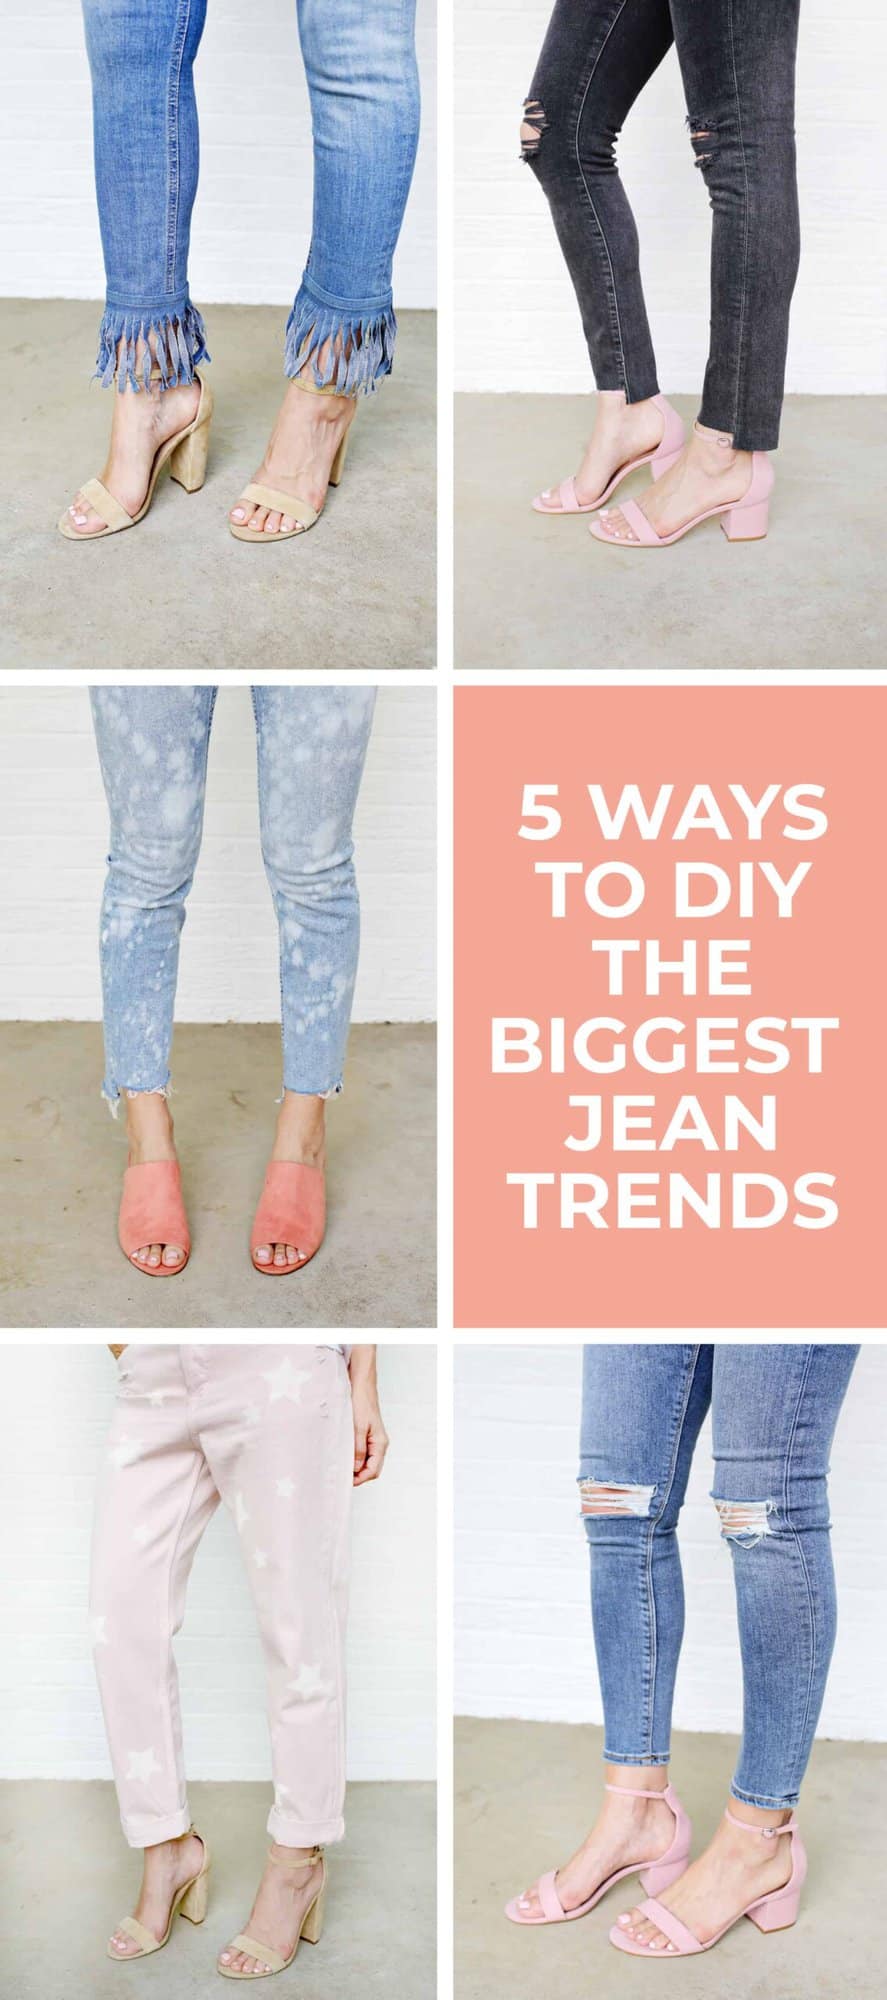 5 Ways to DIY The Biggest Jean Trends! - A Beautiful Mess